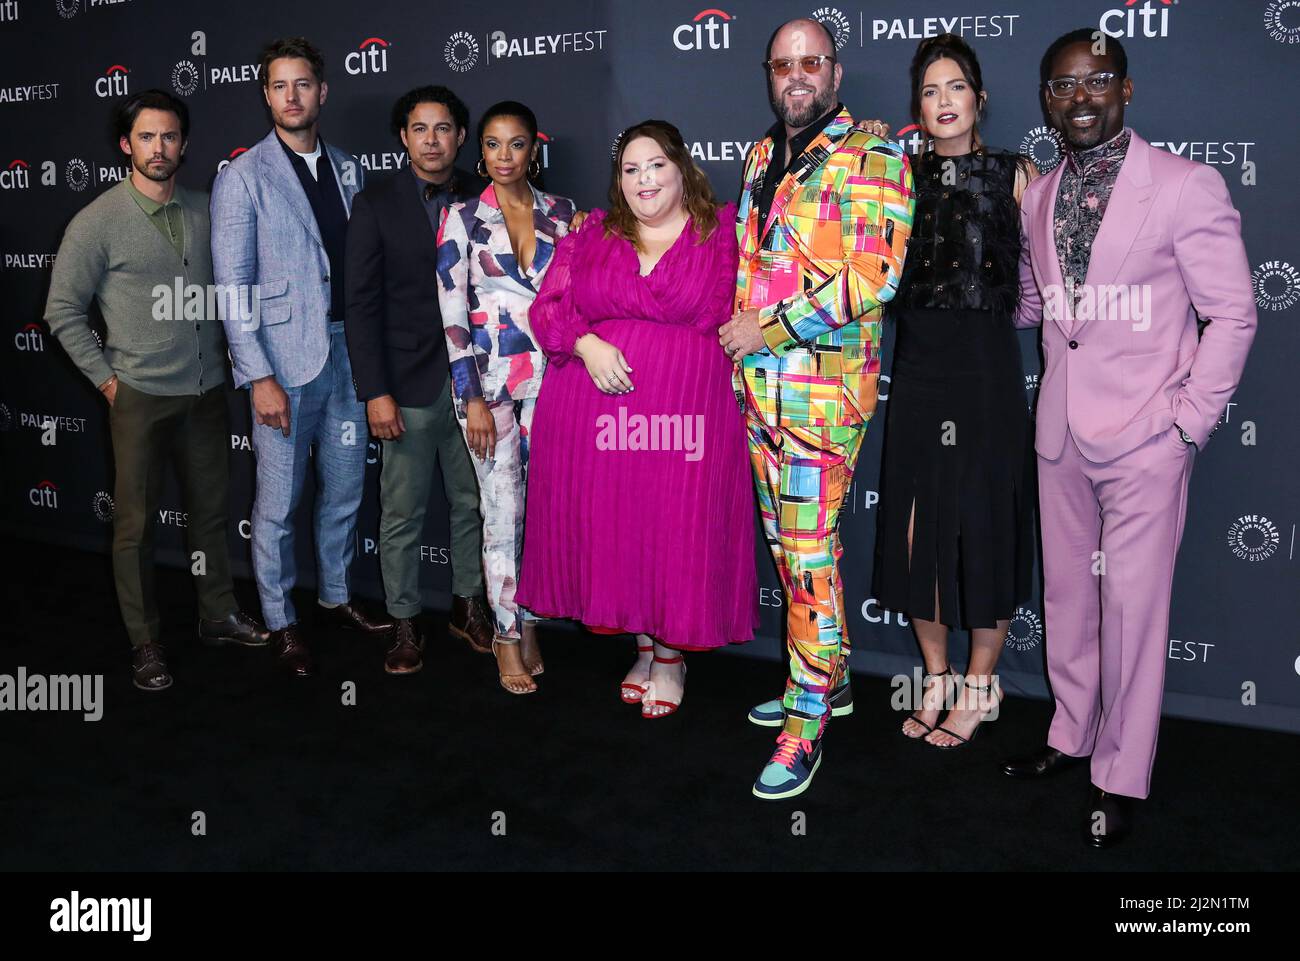 Hollywood, United States. 02nd Apr, 2022. HOLLYWOOD, LOS ANGELES, CALIFORNIA, USA - APRIL 02: Milo Ventimiglia, Justin Hartley, Jon Huertas, Susan Kelechi Watson, Chrissy Metz, Chris Sullivan, Mandy Moore and Sterling K. Brown arrive at the 2022 PaleyFest LA - NBC's 'This Is Us' held at the Dolby Theatre on April 2, 2022 in Hollywood, Los Angeles, California, United States. (Photo by Xavier Collin/Image Press Agency) Credit: Image Press Agency/Alamy Live News Credit: Image Press Agency/Alamy Live News Stock Photo